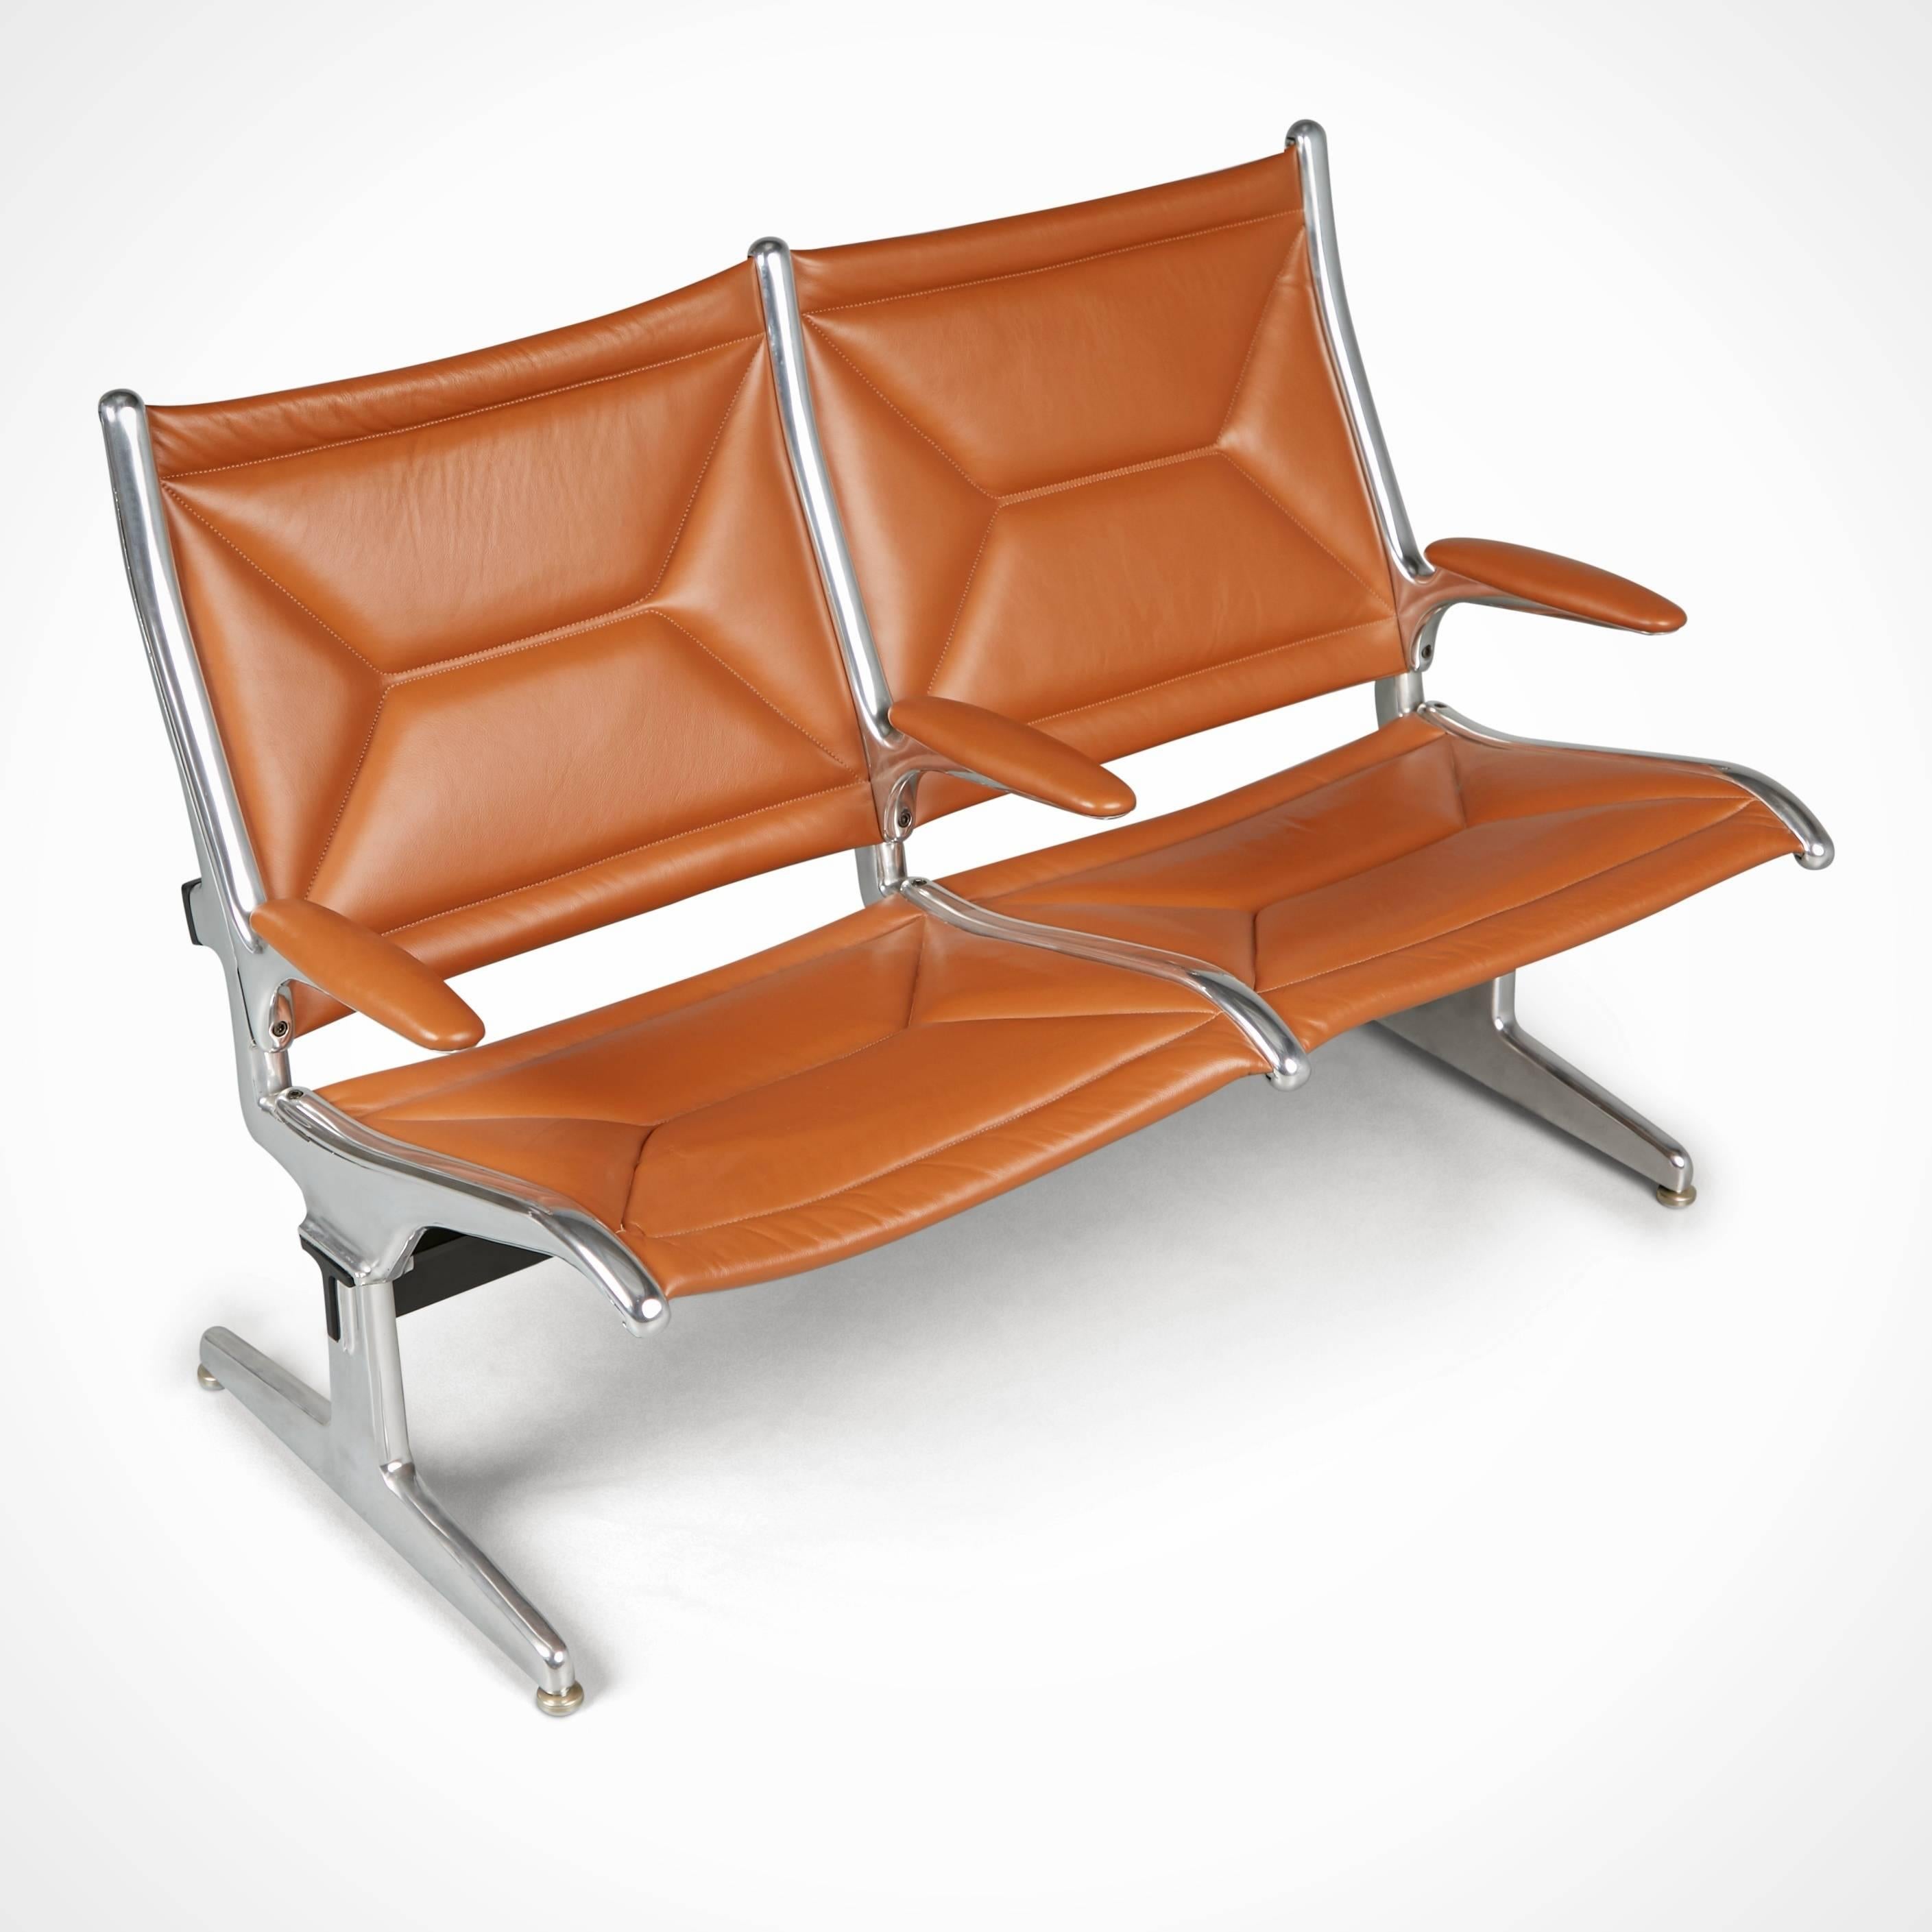 In 1962 Ray & Charles Eames were commissioned to design the optimal utilitarian seating for the first American international airports. Created for comfort, convenience, and practicality, this world renown chair has never before been re-envisioned